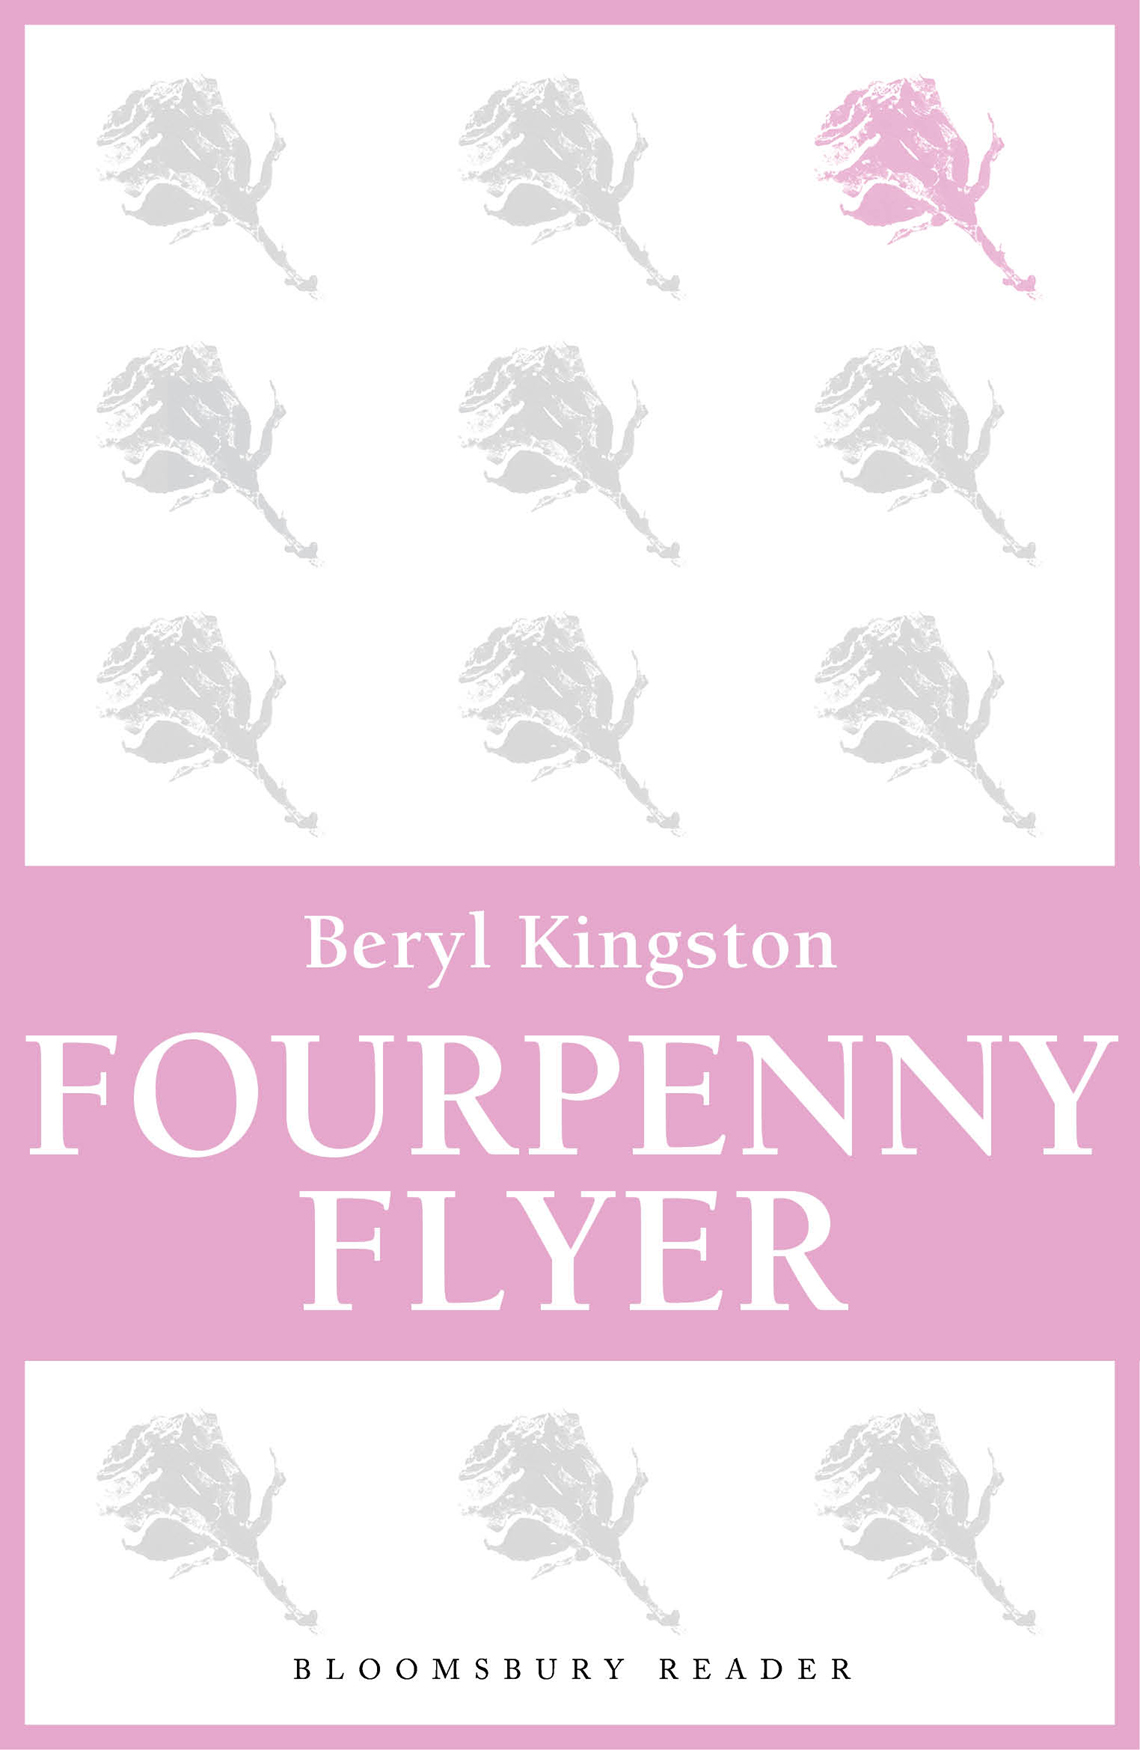 Fourpenny Flyer